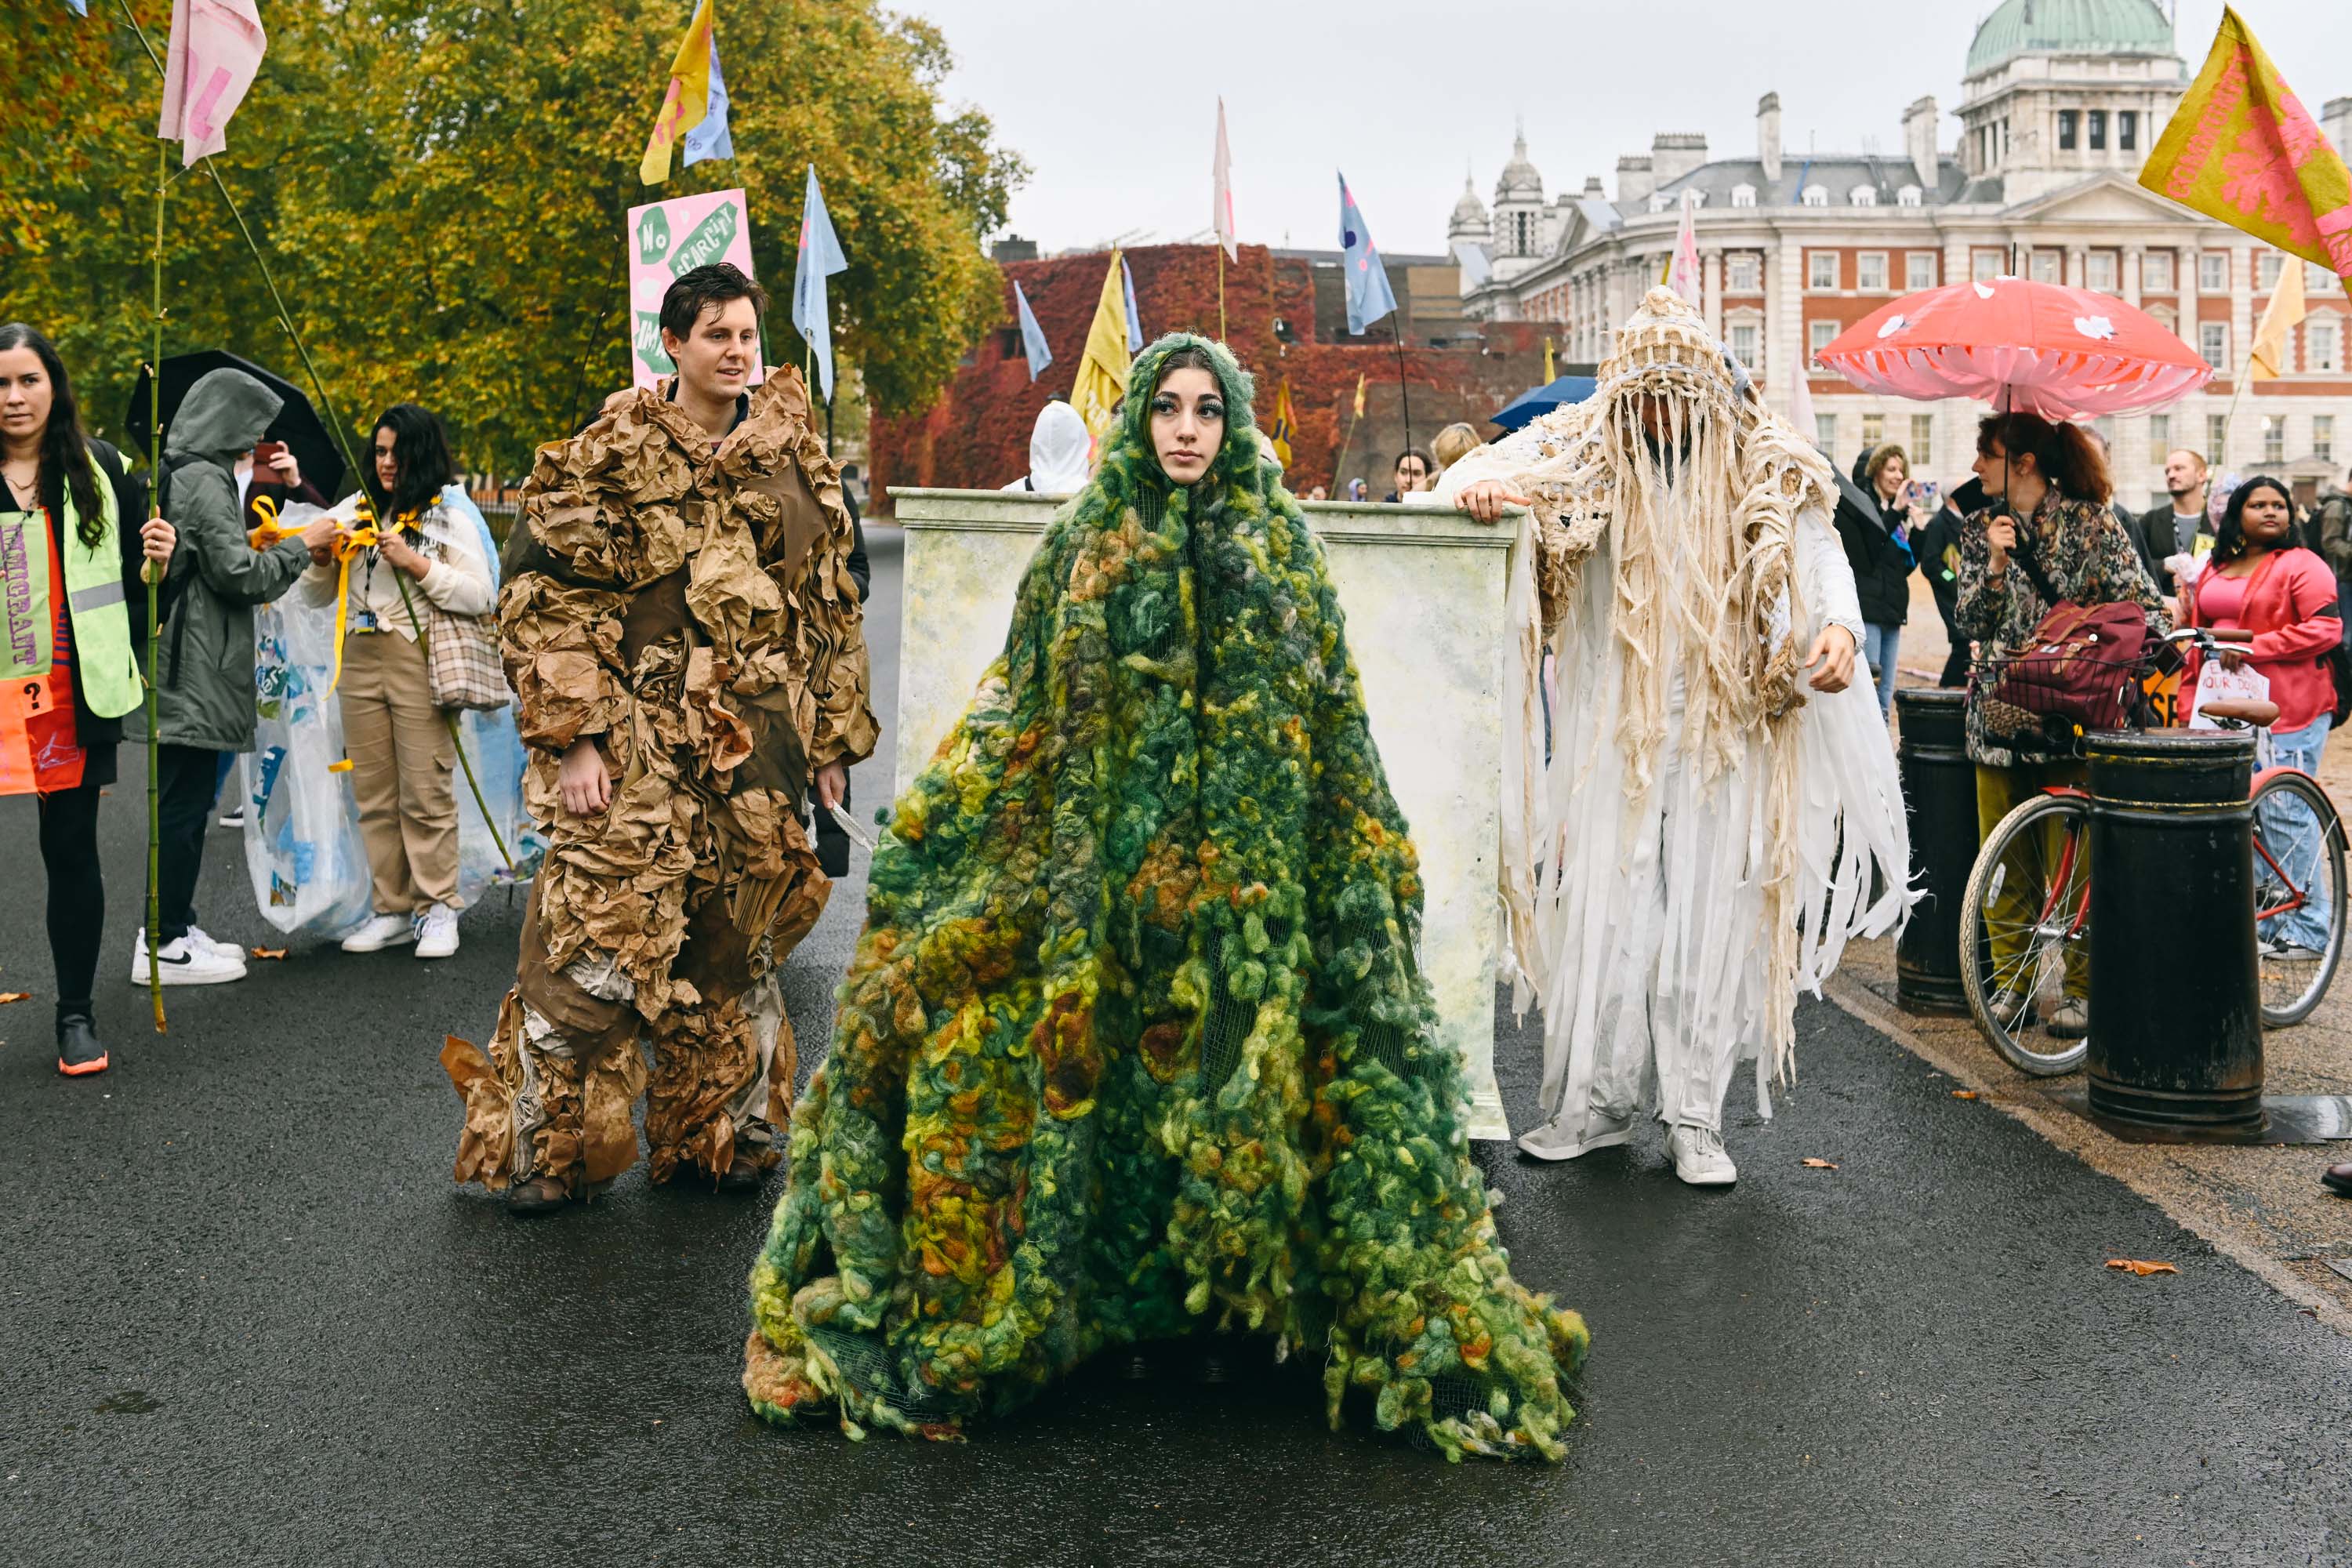 Figures standing  wearing green moss, cardboard and pale fabric garments